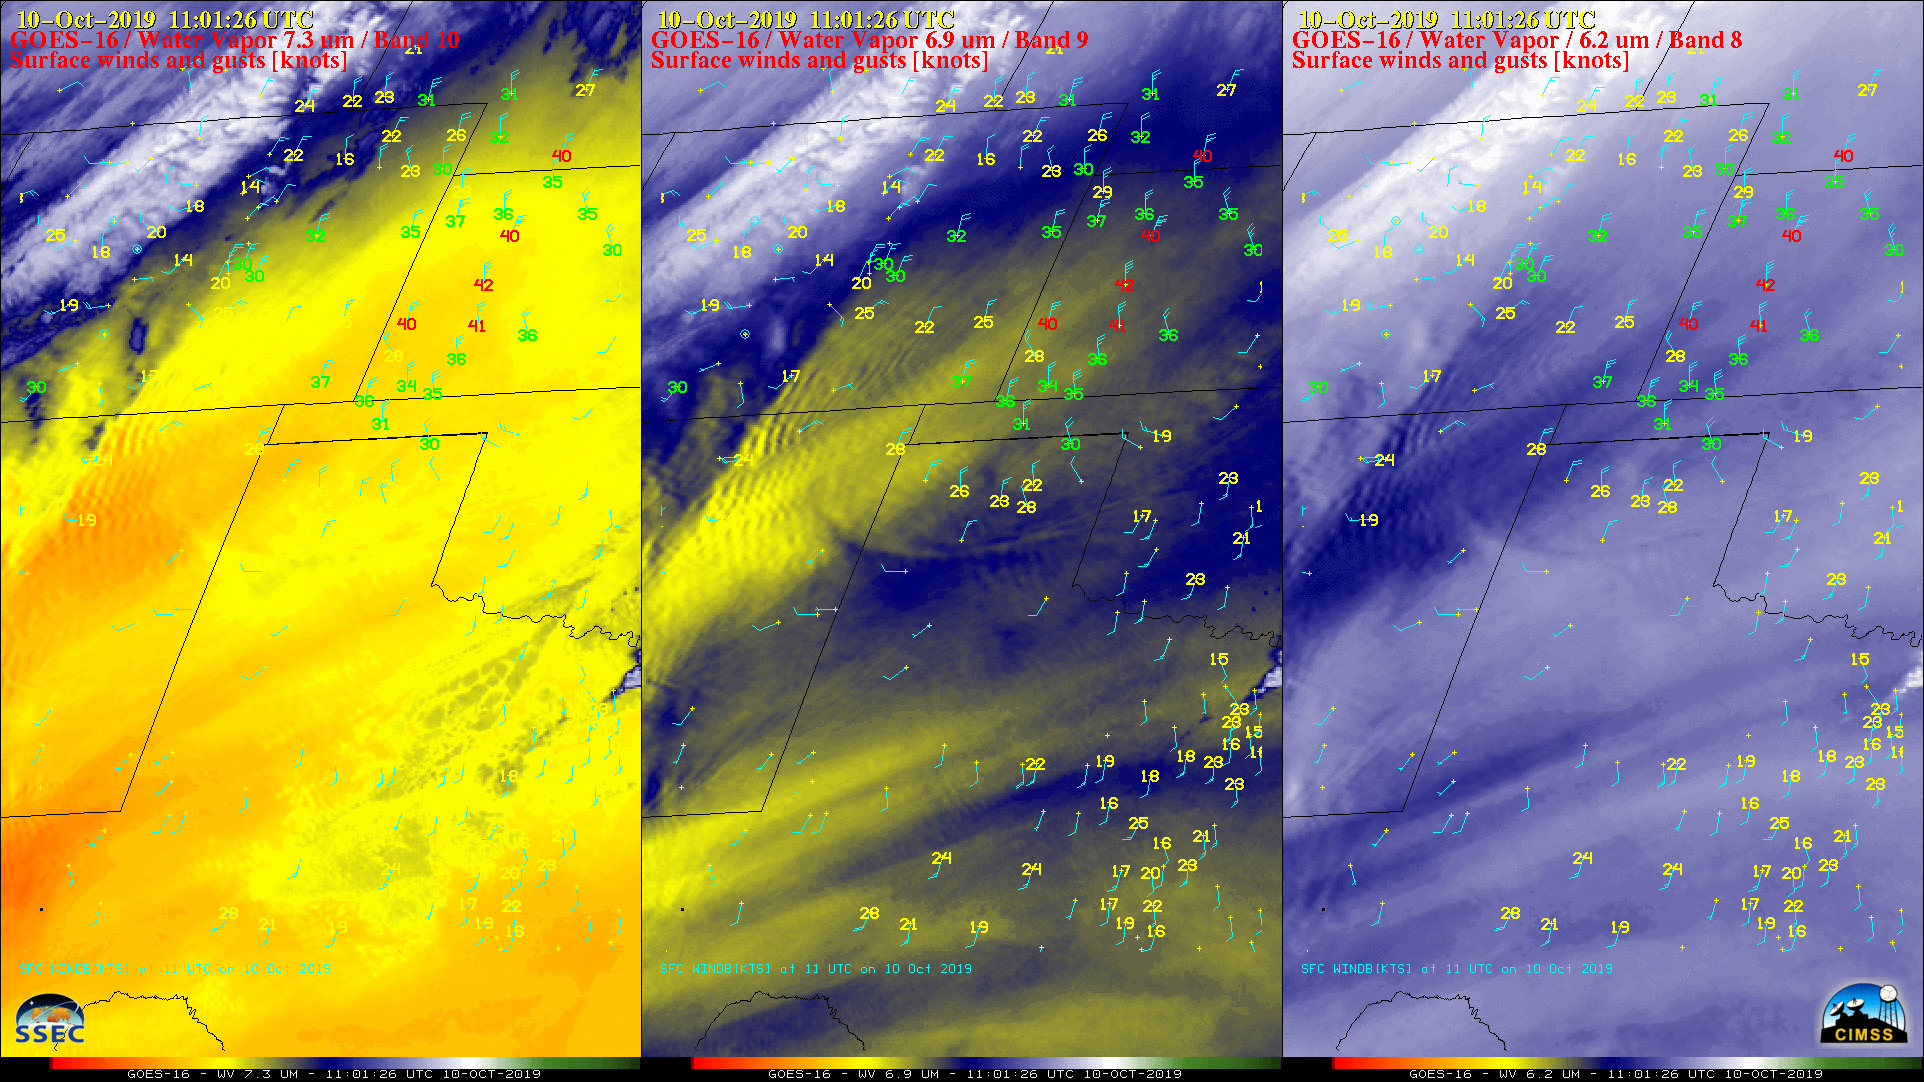 GOES-16 Low-level (7.3 µm, left), Mid-level (6.9 µm, center) and Upper-level (6.2 µm, right) Water Vapor images, with plots of surface wind barbs and gusts in knots [click to play animation | MP4]